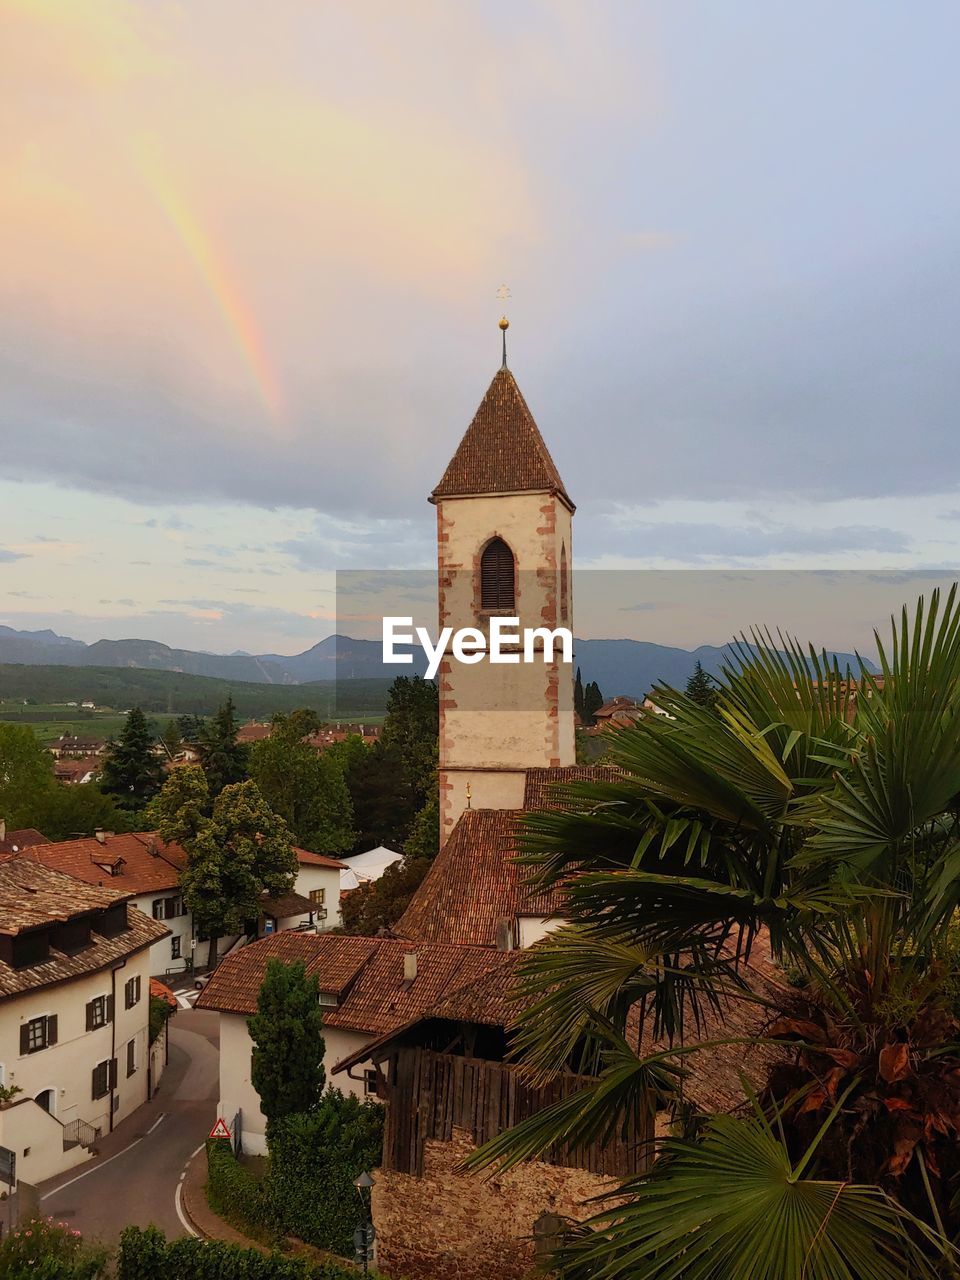 A small village in italy with a rainbow next to the church